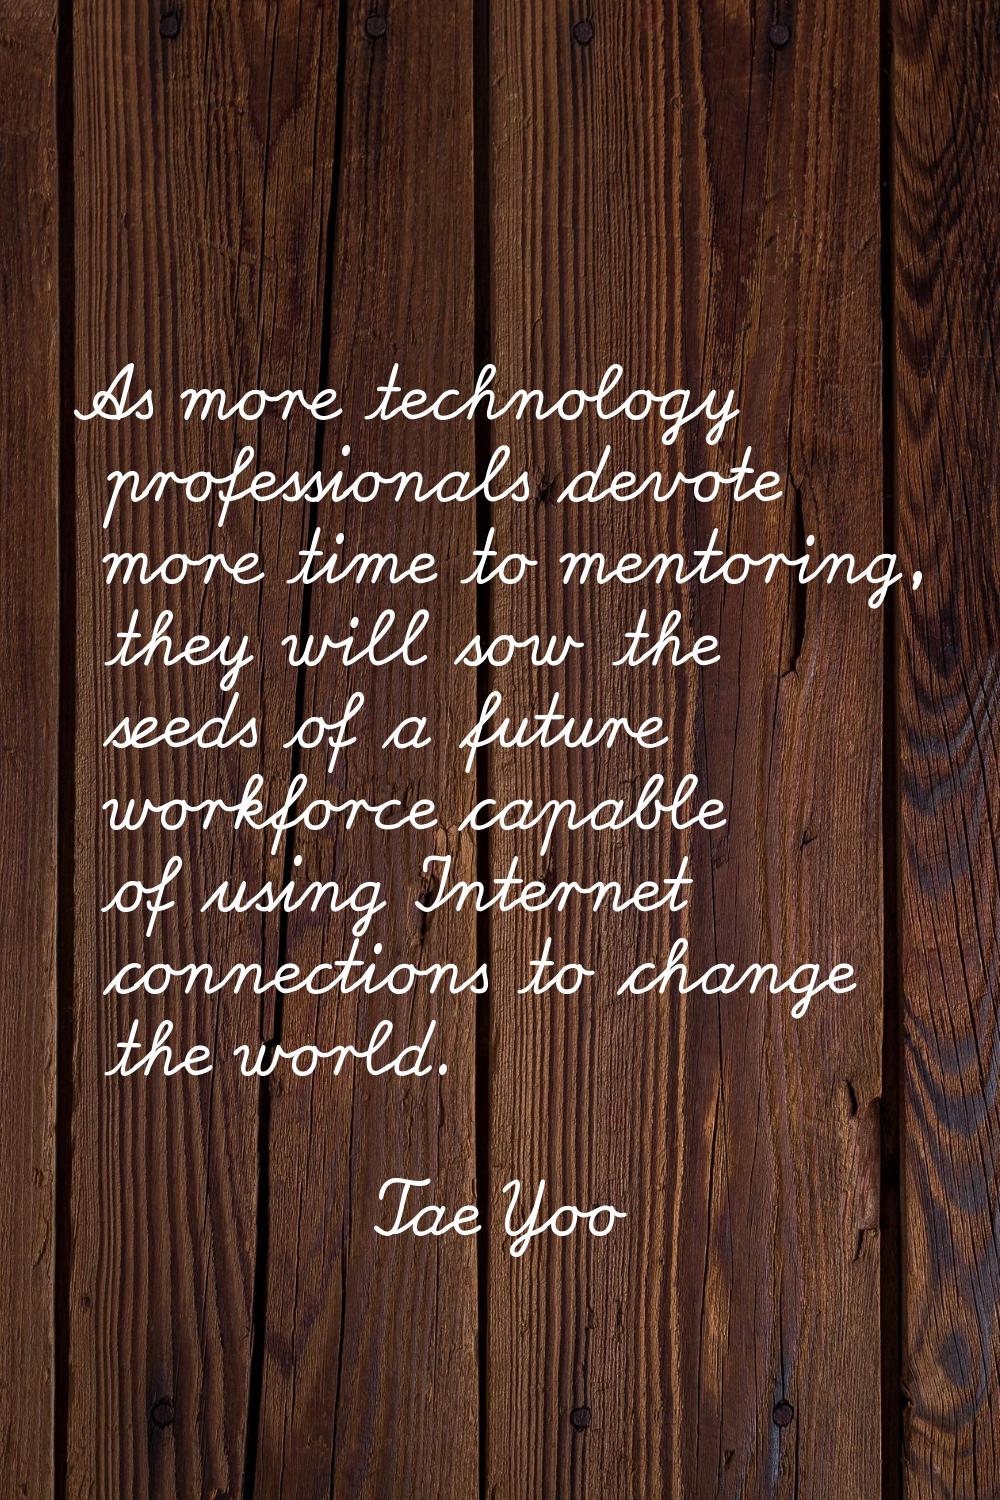 As more technology professionals devote more time to mentoring, they will sow the seeds of a future